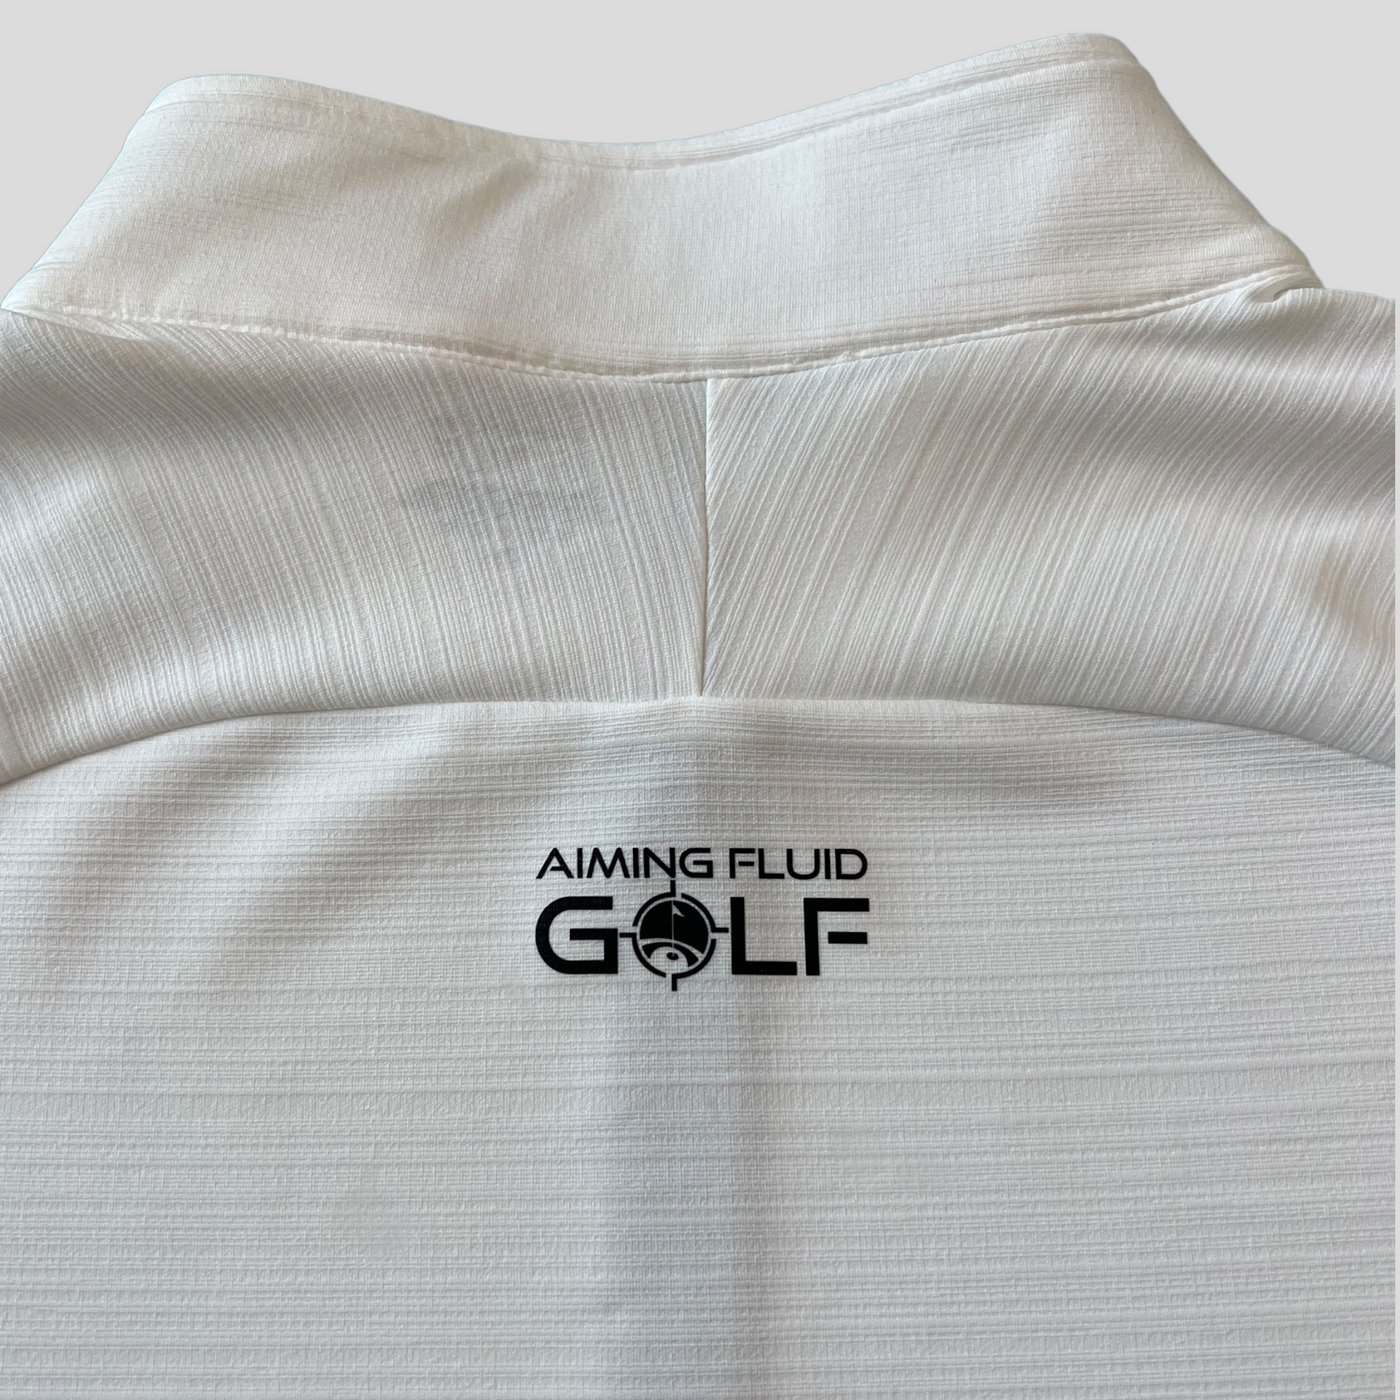 A photograph of the back collar of The Perfect Pullover t-shirt from Aiming Fluid Golf.